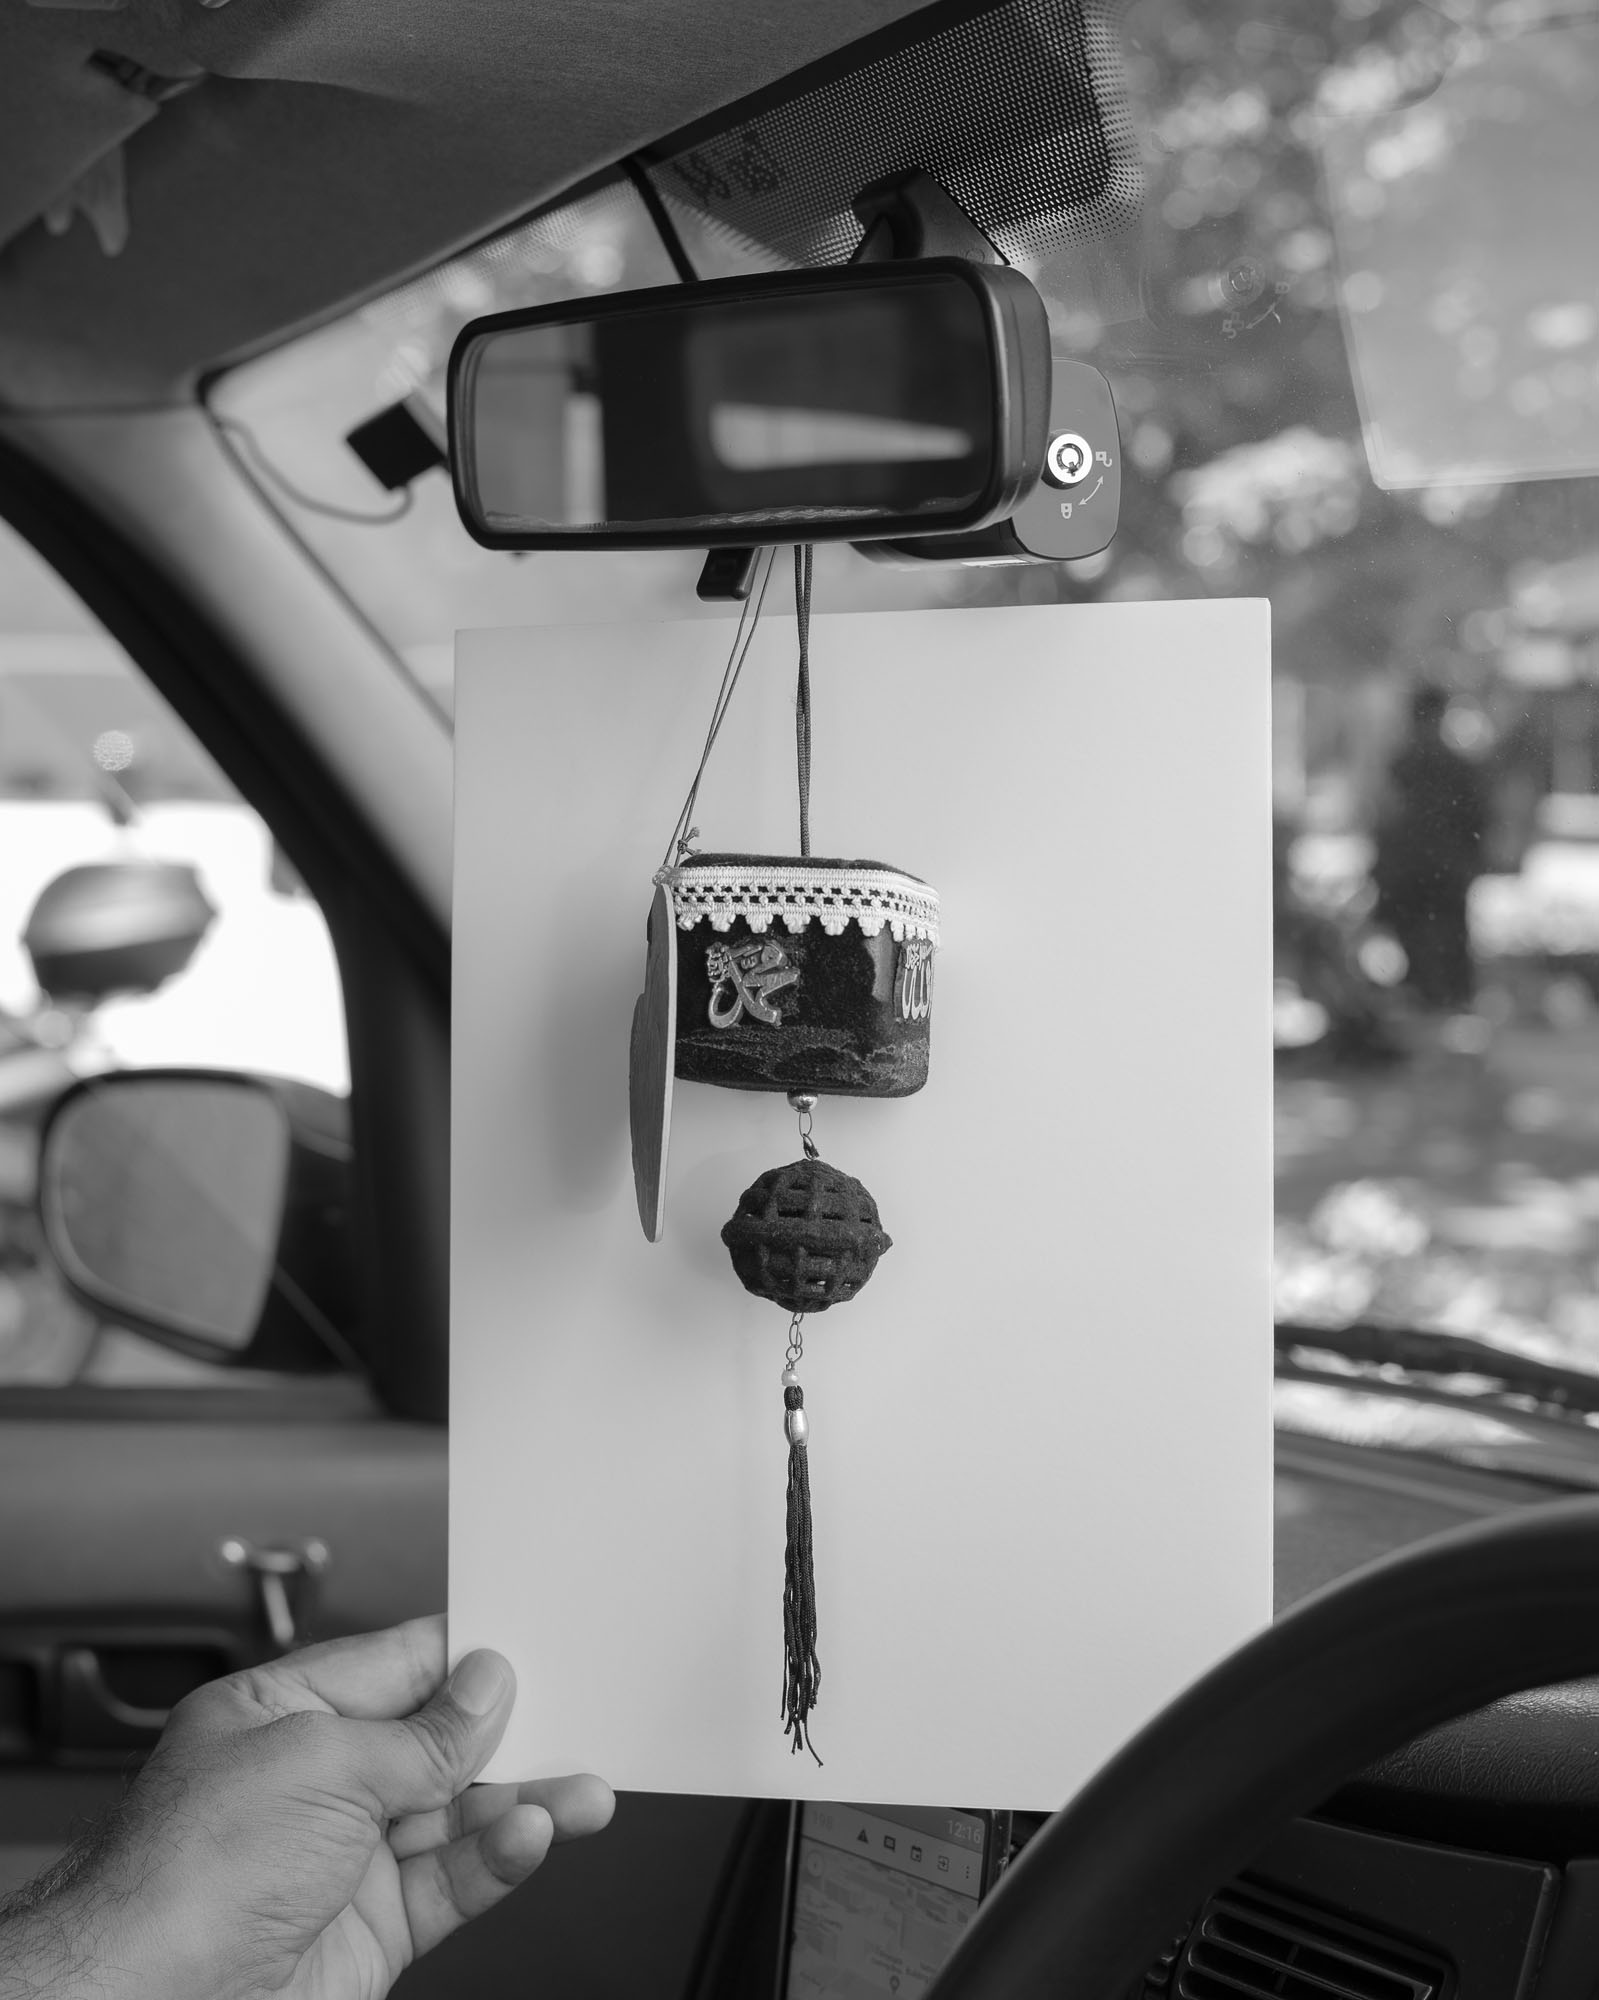 An item representing a Kaaba hanging from the rearview mirror of a car.